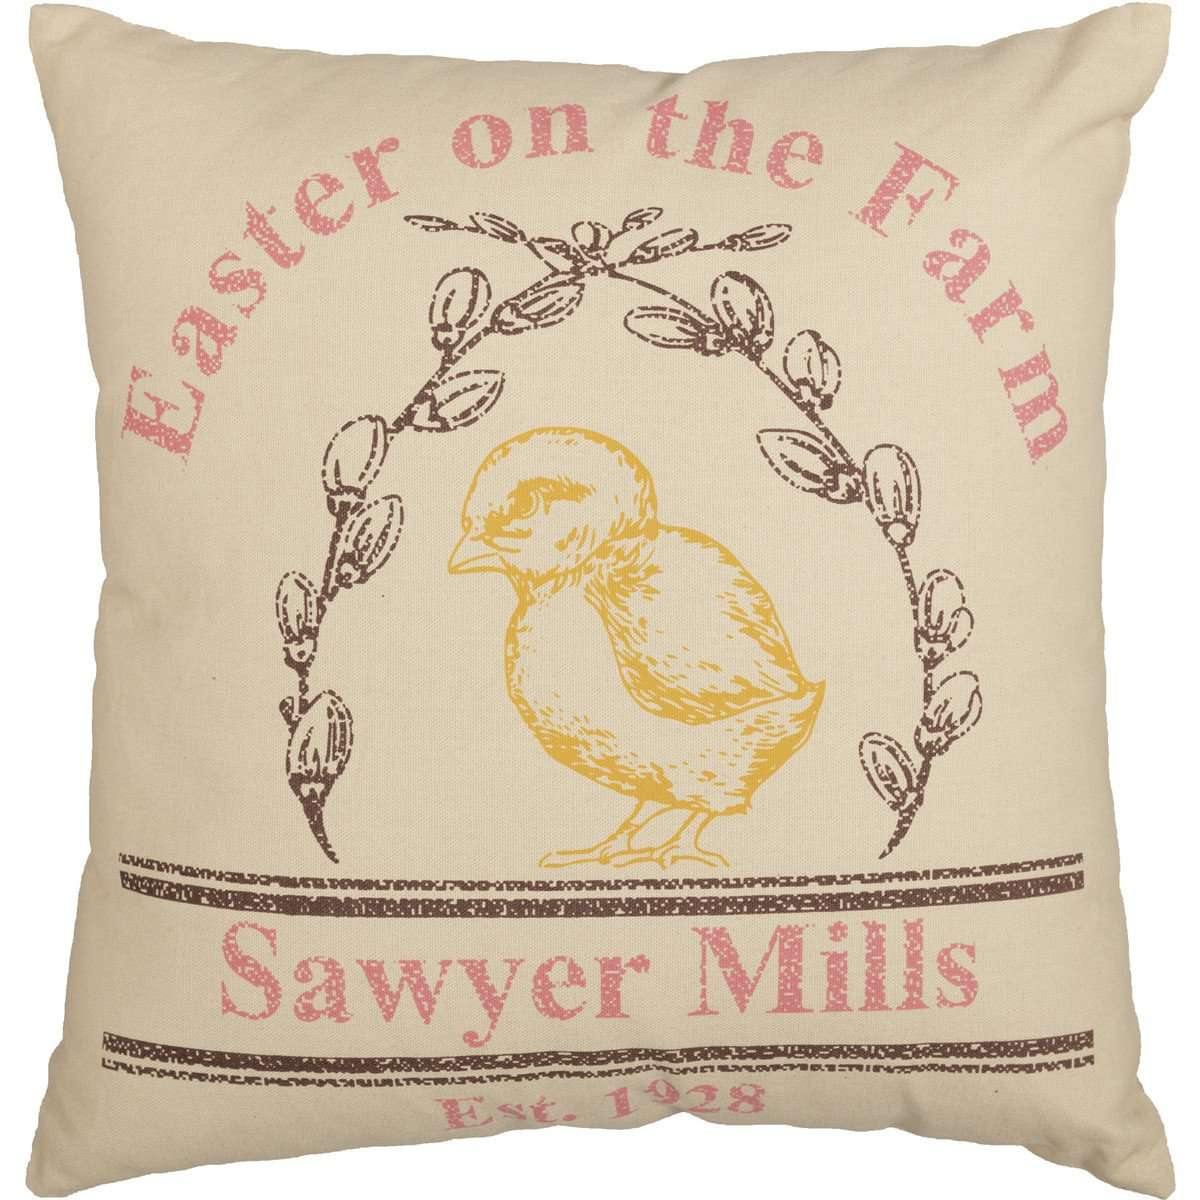 Sawyer Mill Easter on the Farm Chick Pillow 18x18 VHC Brands front